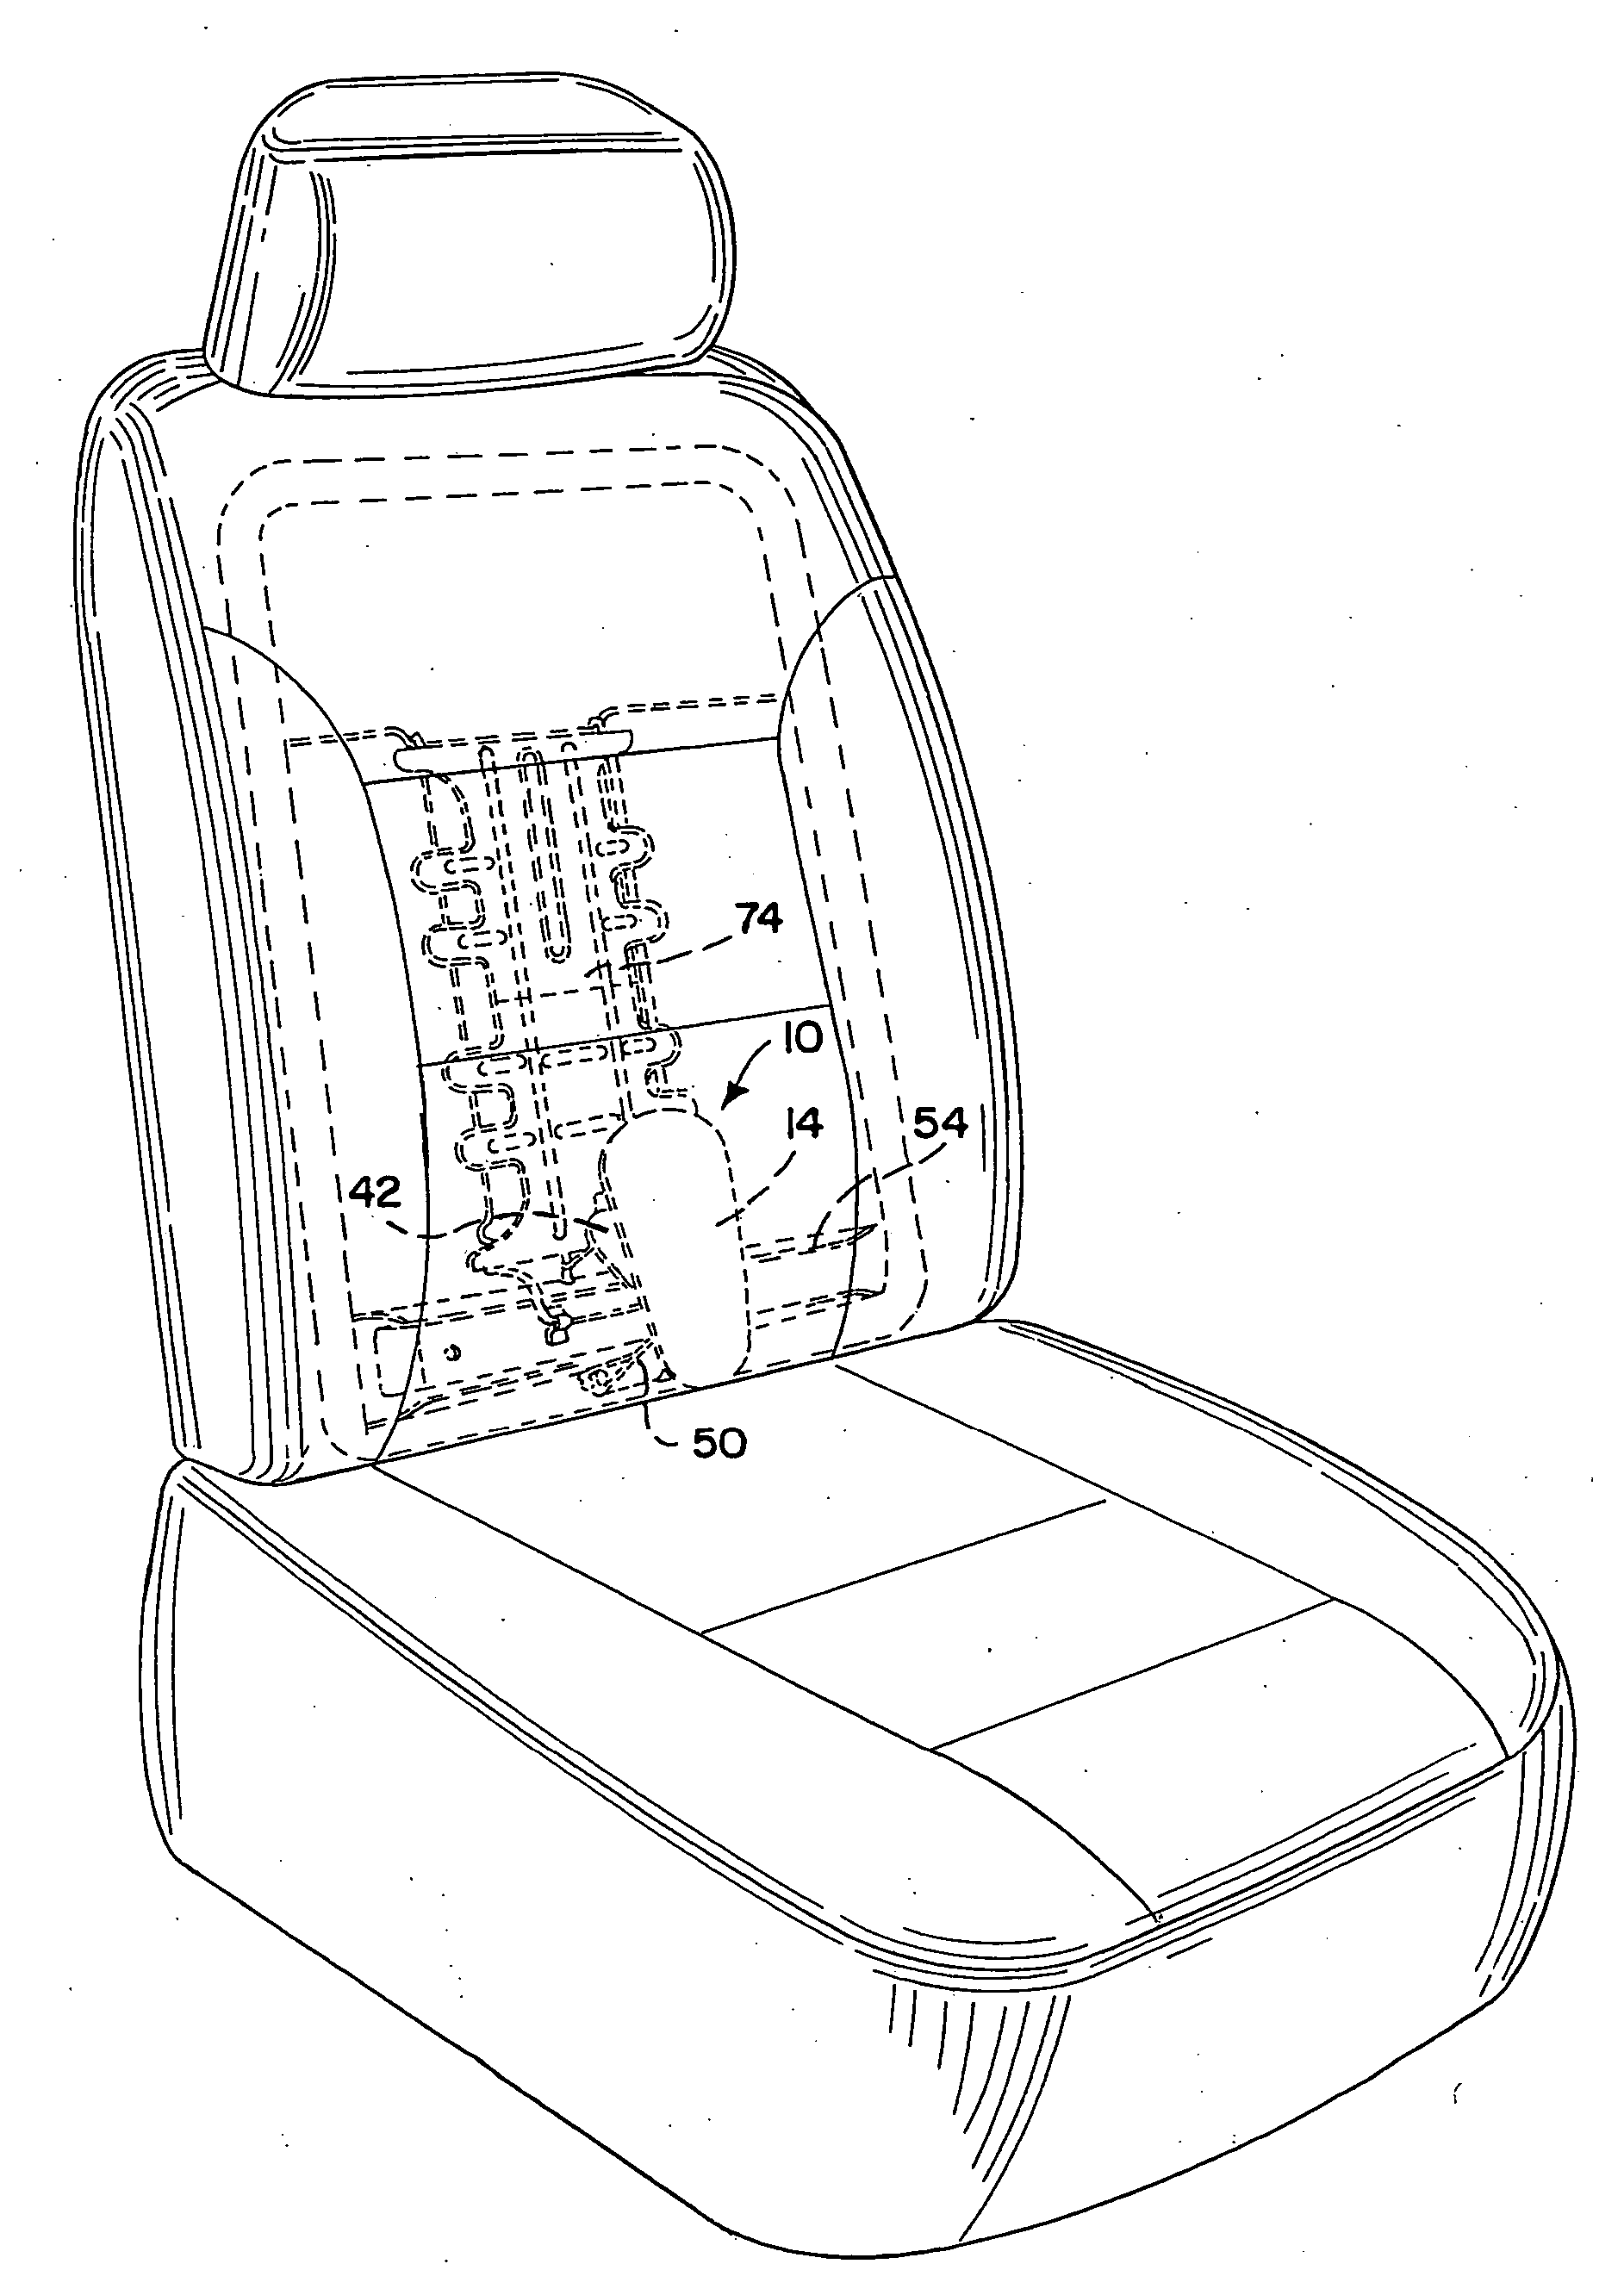 Seat with adjustable support system